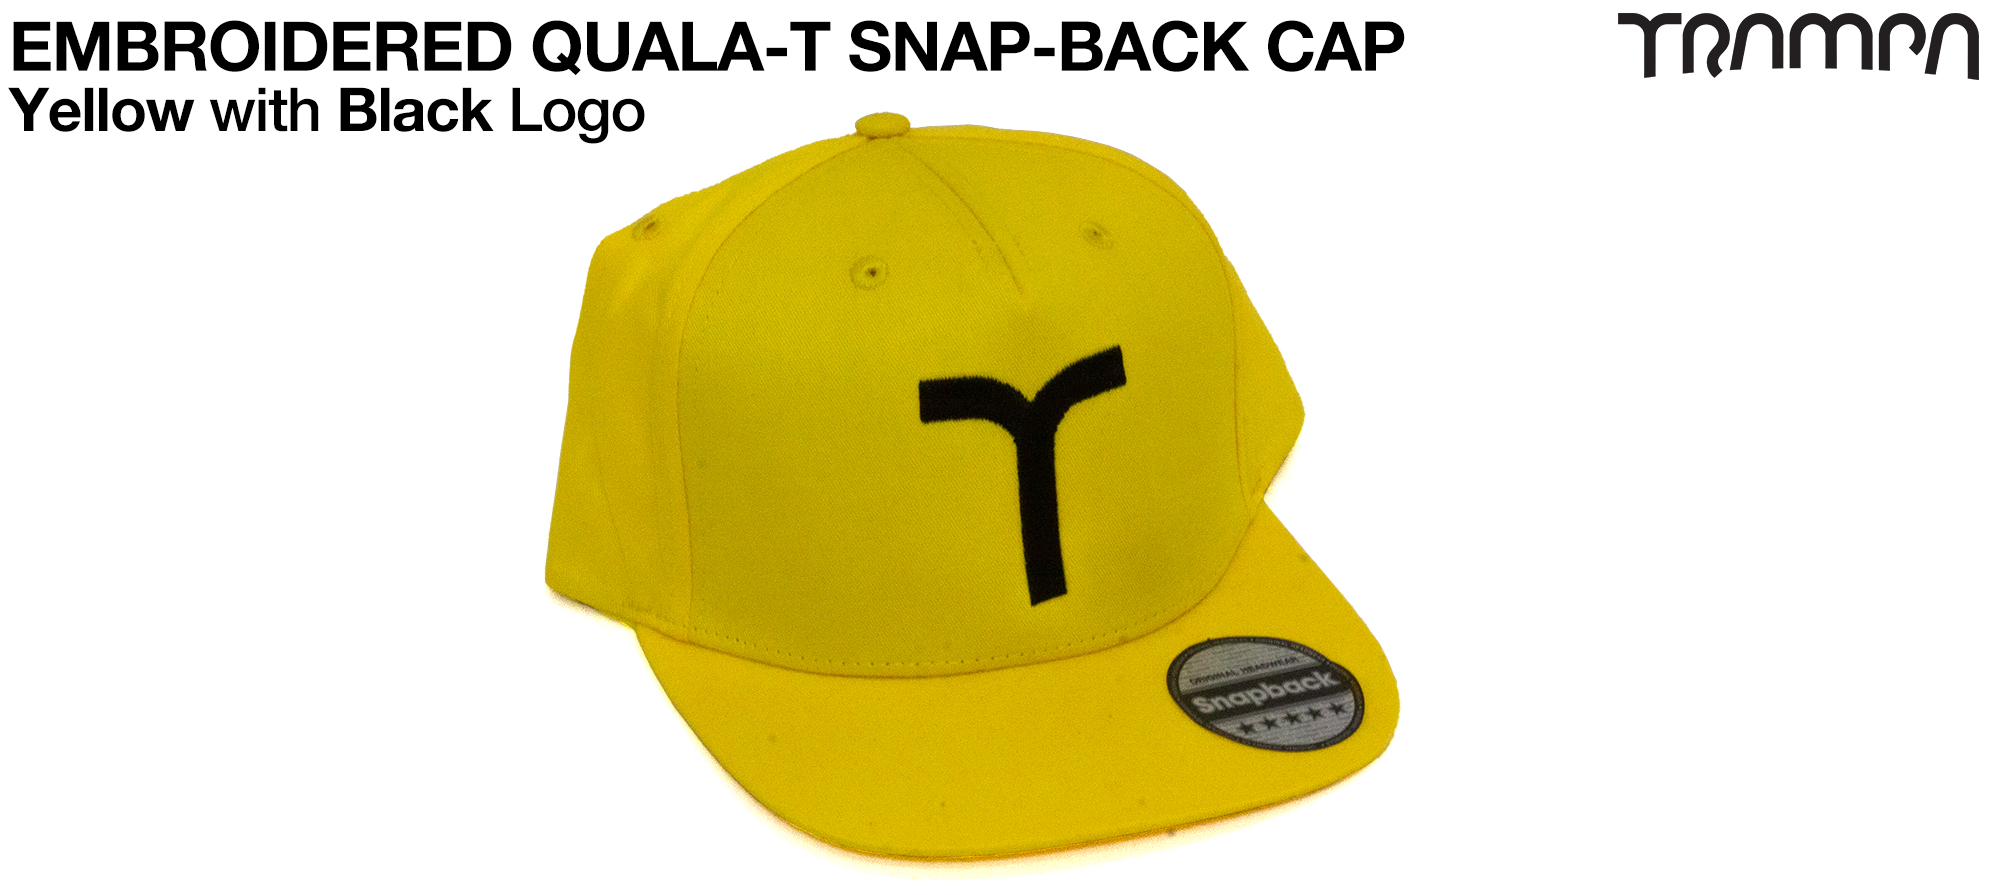 YELLOW SNAPBACK Cap with BLACK QUALA-T logo embroidered 